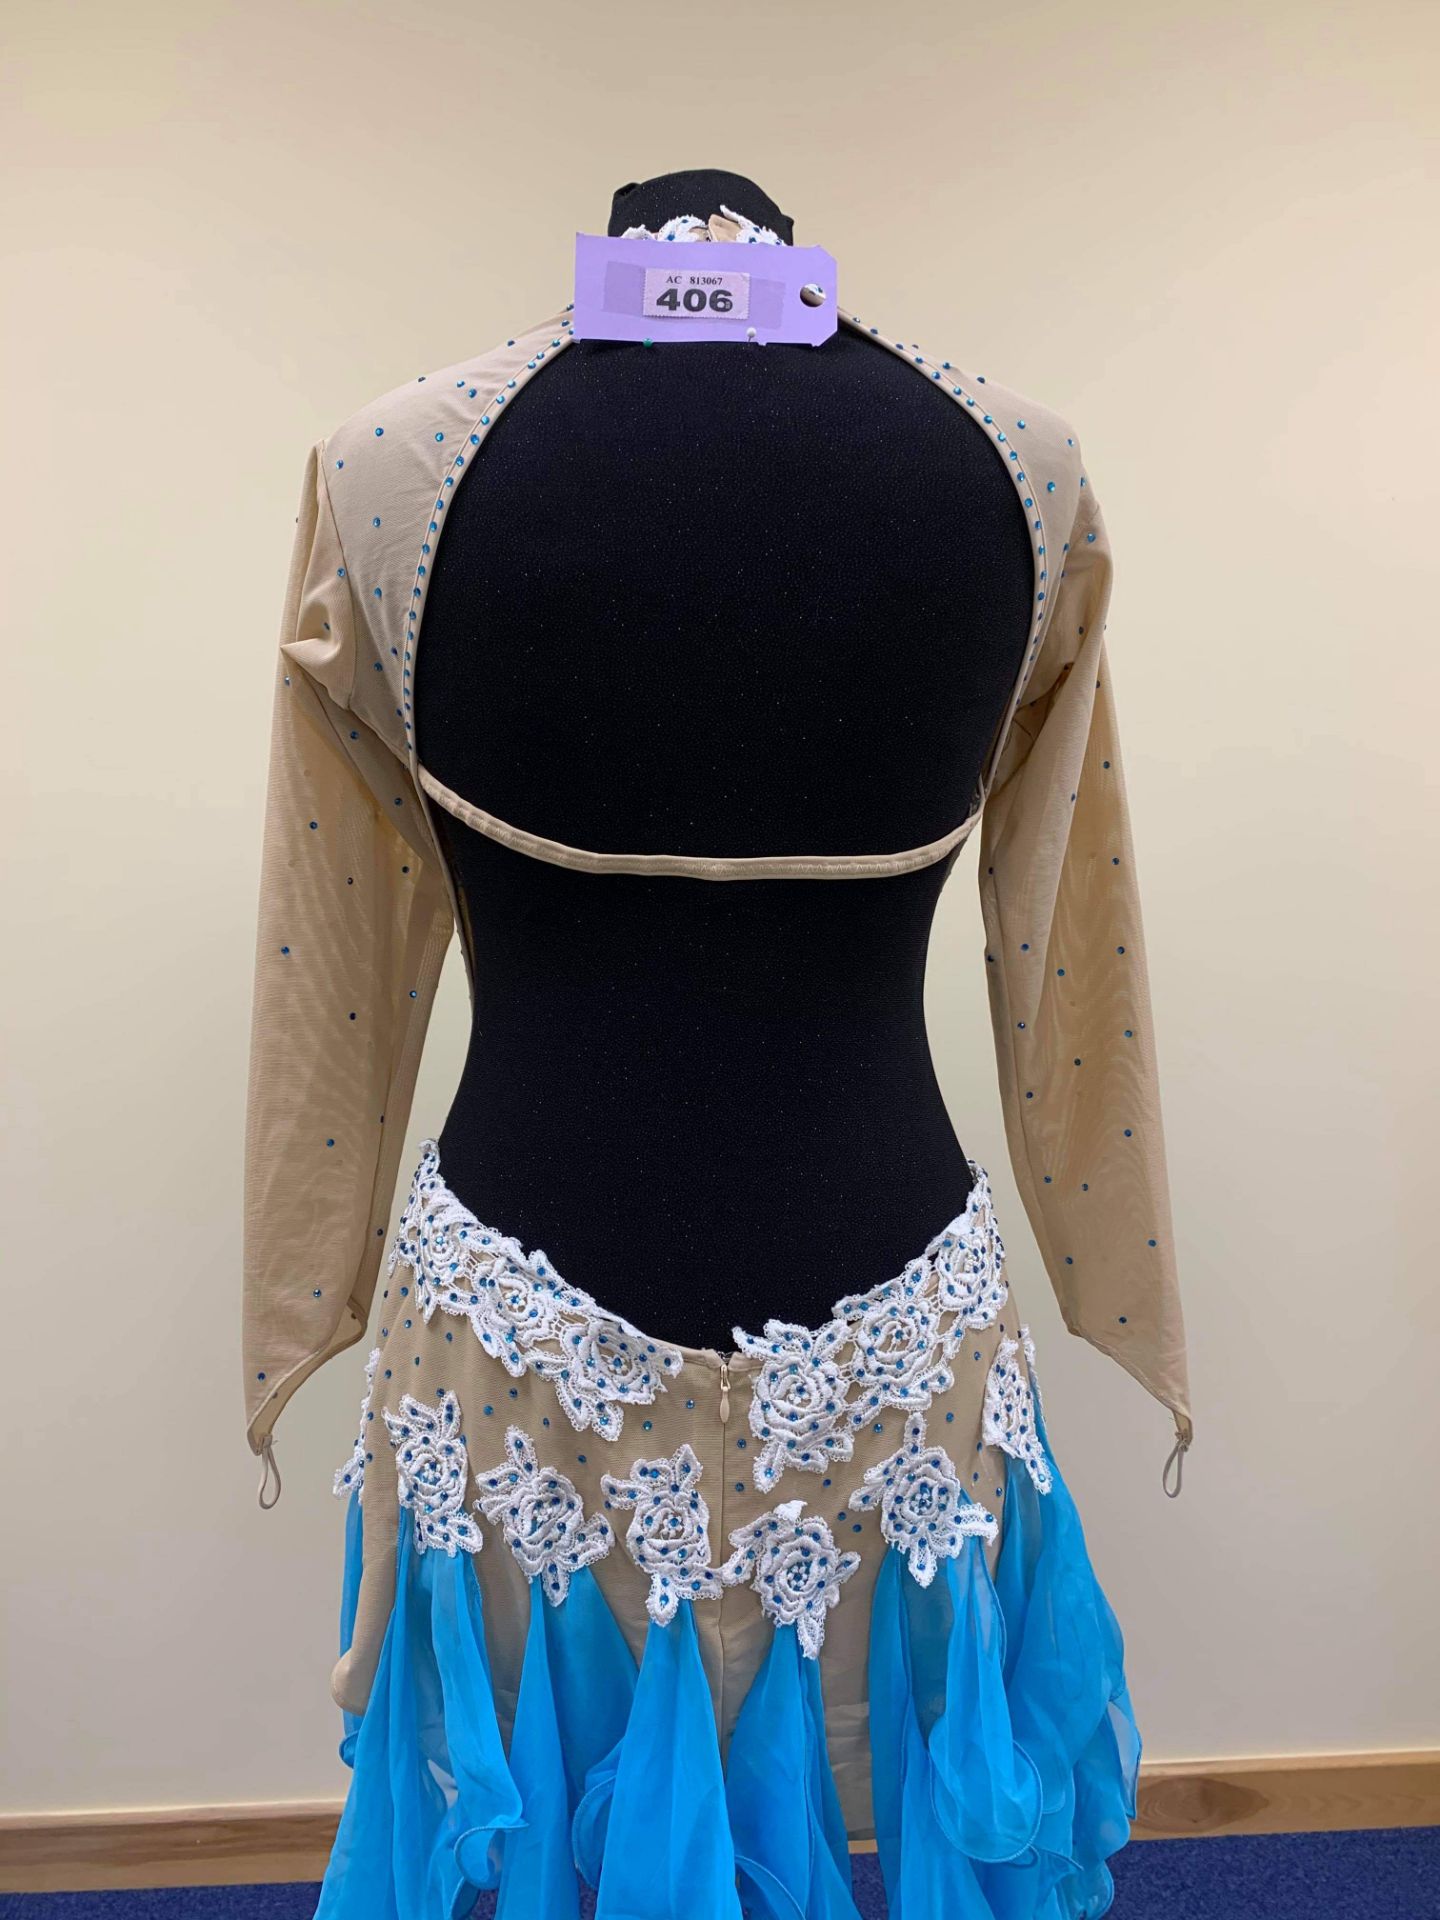 Latin Dancing Dress Size 14-16 Approx. Blue - Image 2 of 2